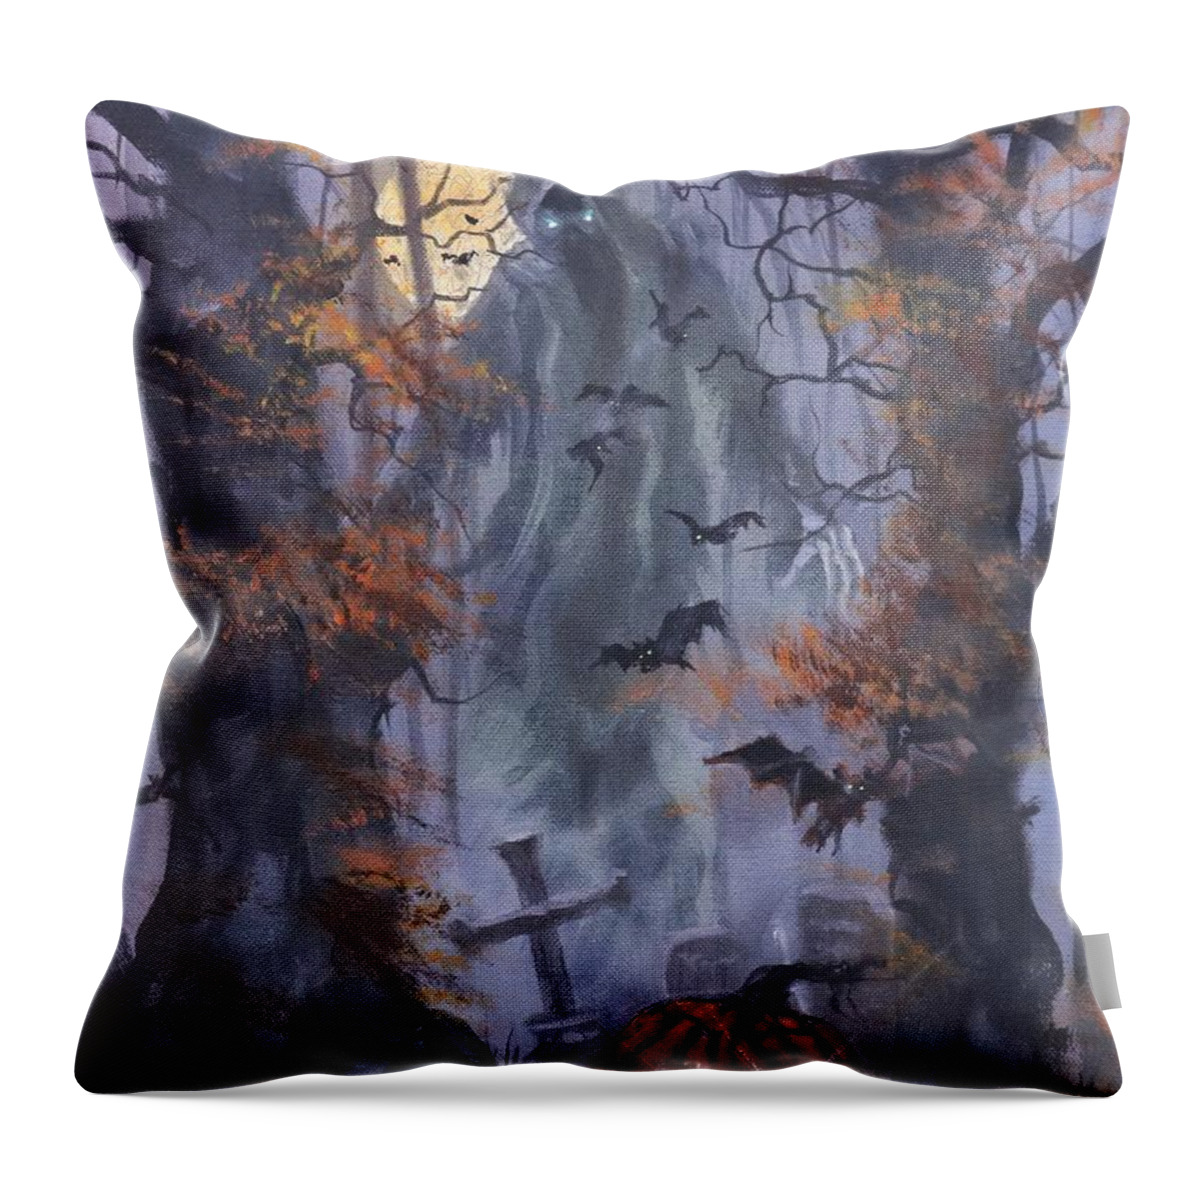 Halloween Specter Throw Pillow featuring the painting Halloween Specter by Tom Shropshire